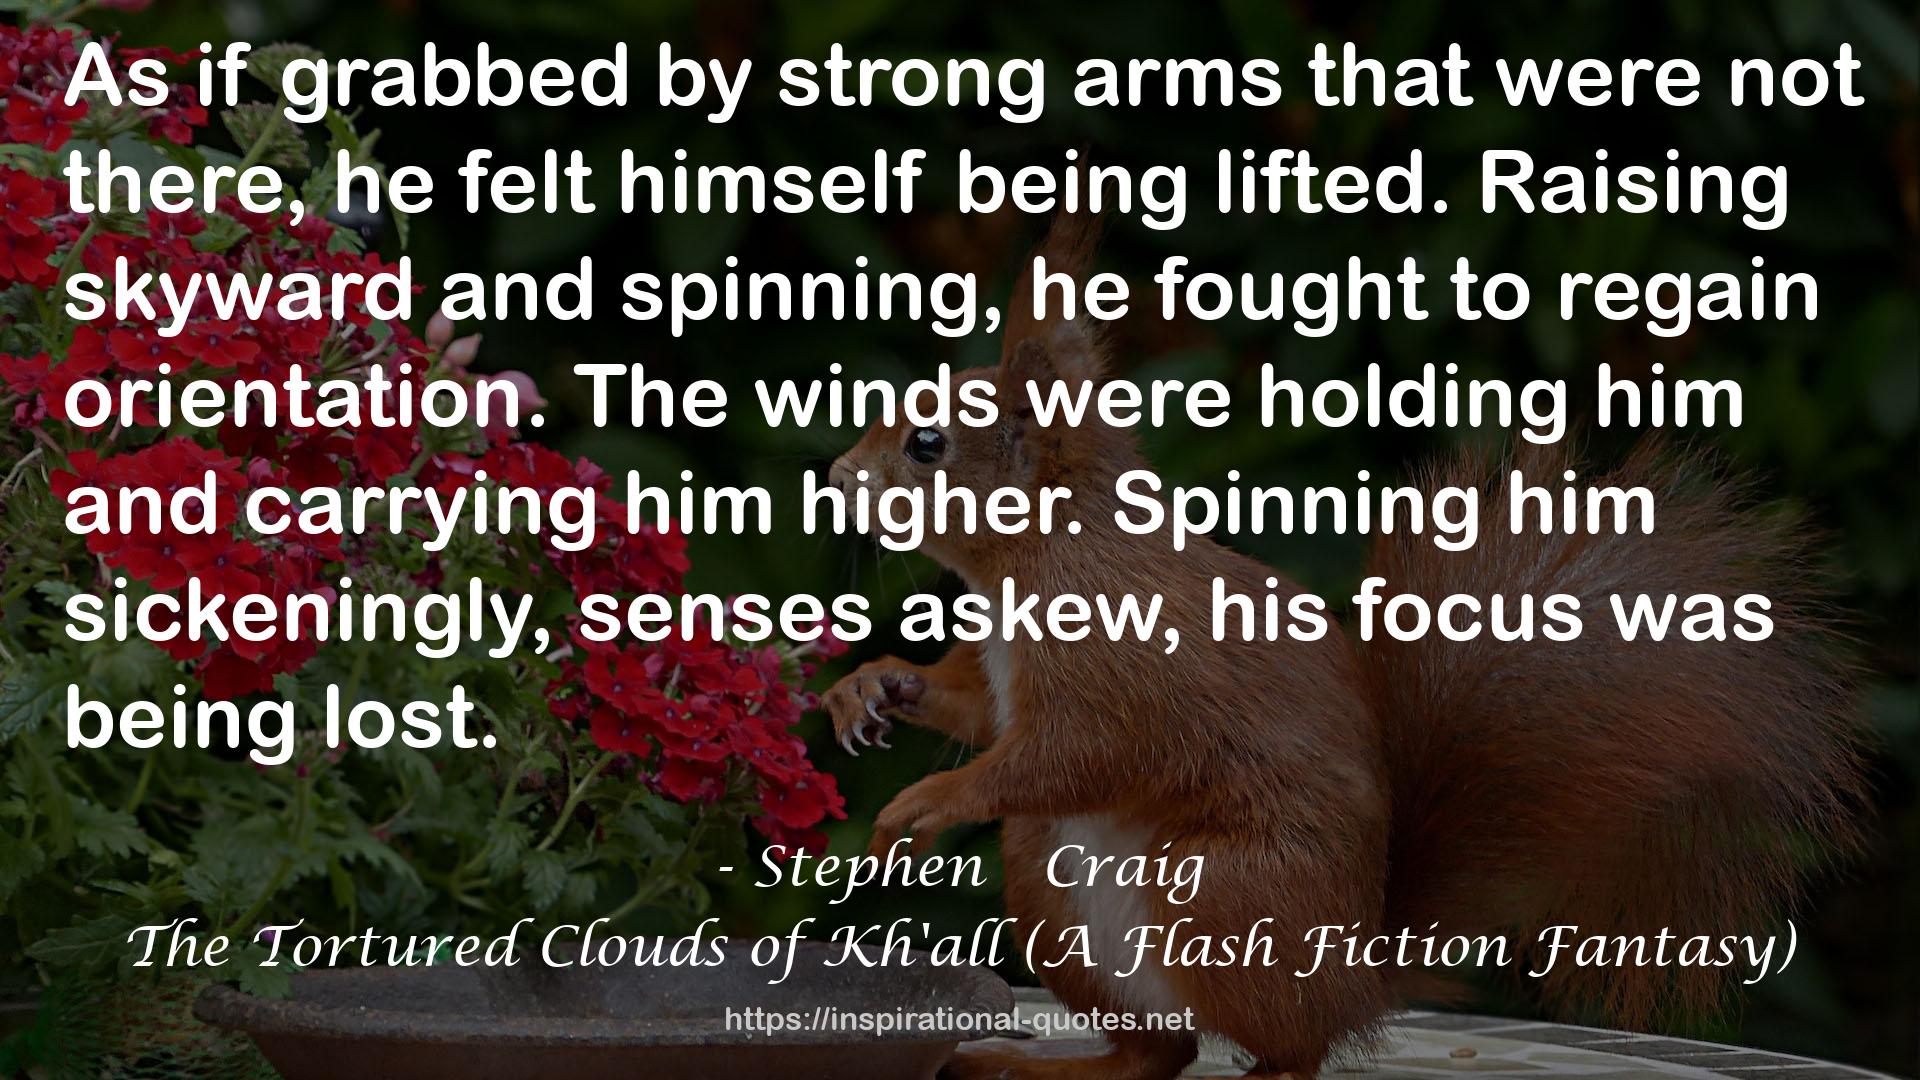 The Tortured Clouds of Kh'all (A Flash Fiction Fantasy) QUOTES